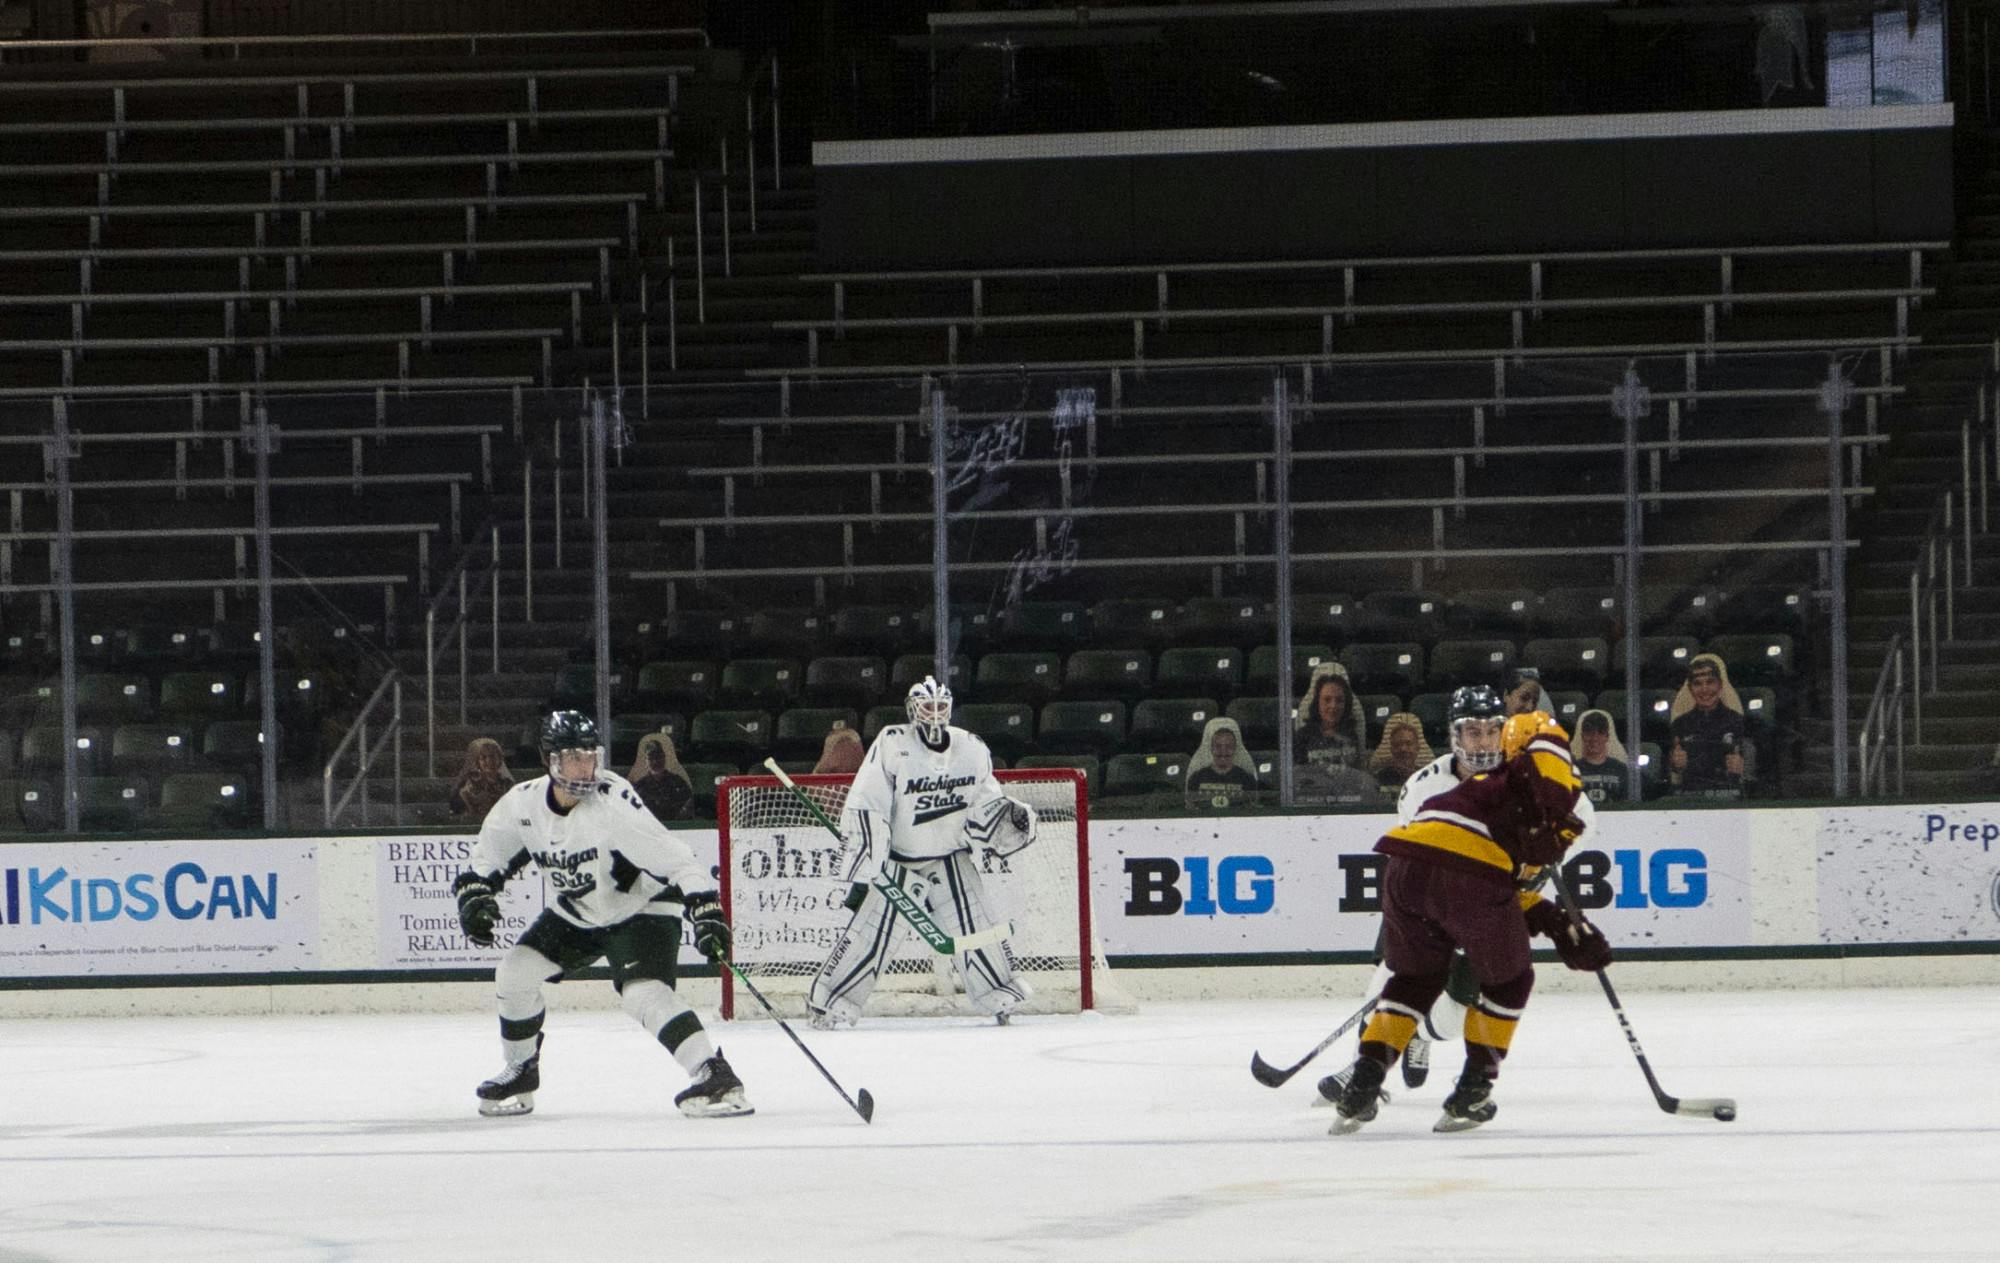 <p>No spectators will be allowed in Munn Ice Arena until further notice due to COVID-19 regulations. The Spartans fell to the Golden Gophers, 3-1, on Dec. 3, 2020.</p>